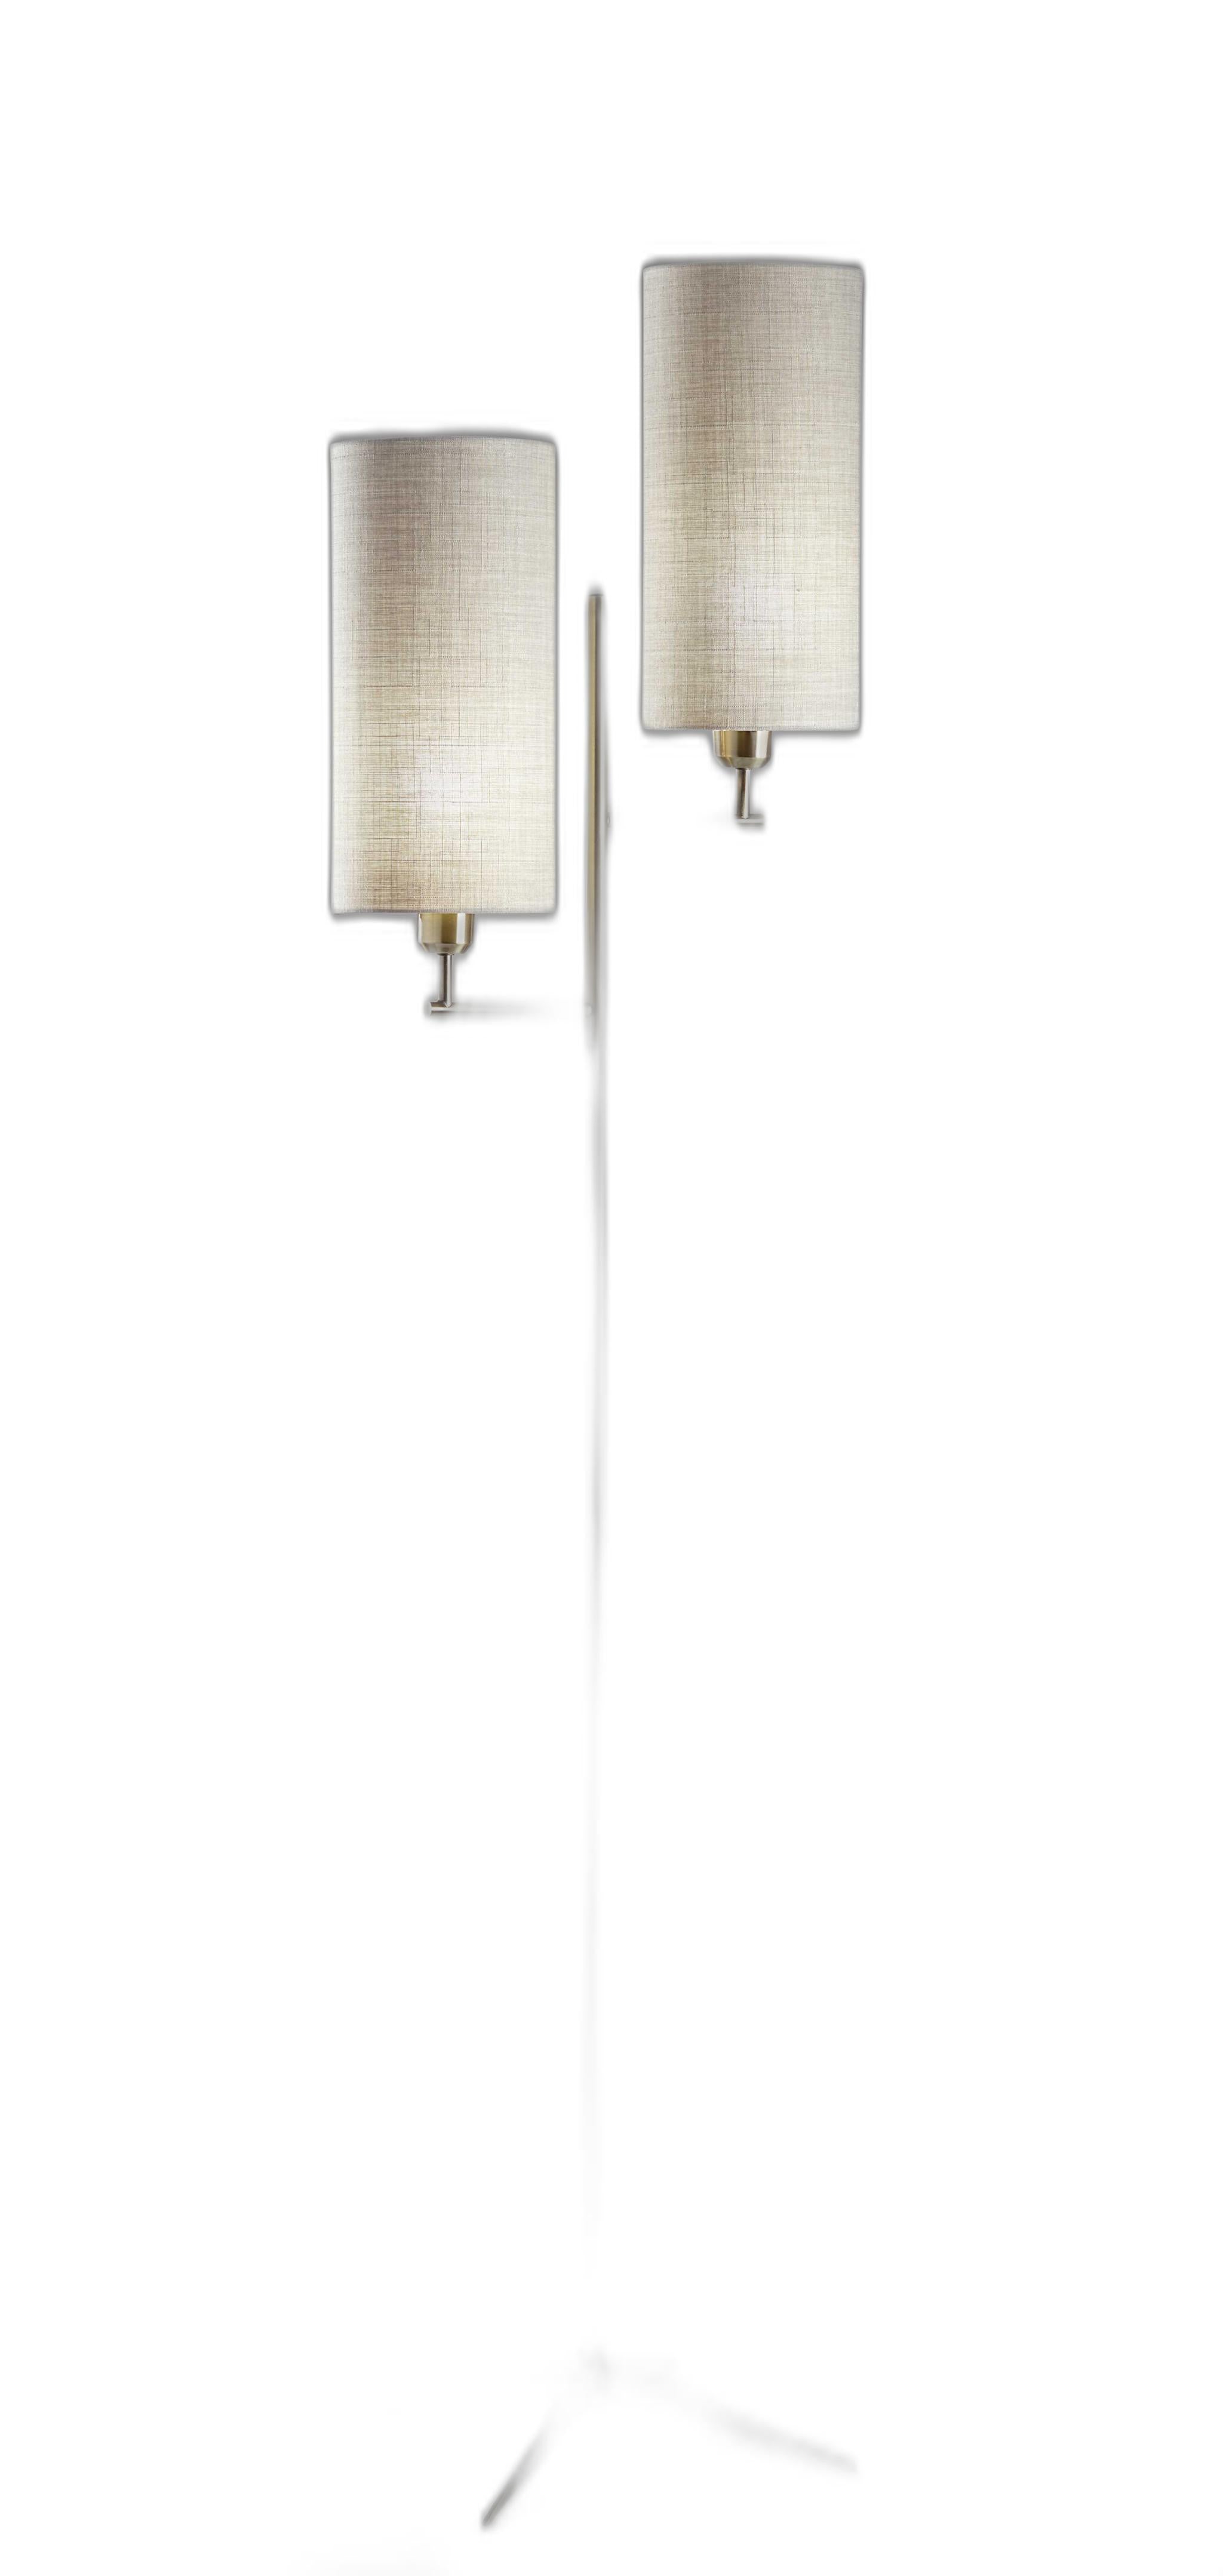 70" Brass Two Light Novelty Floor Lamp With White Drum Shade